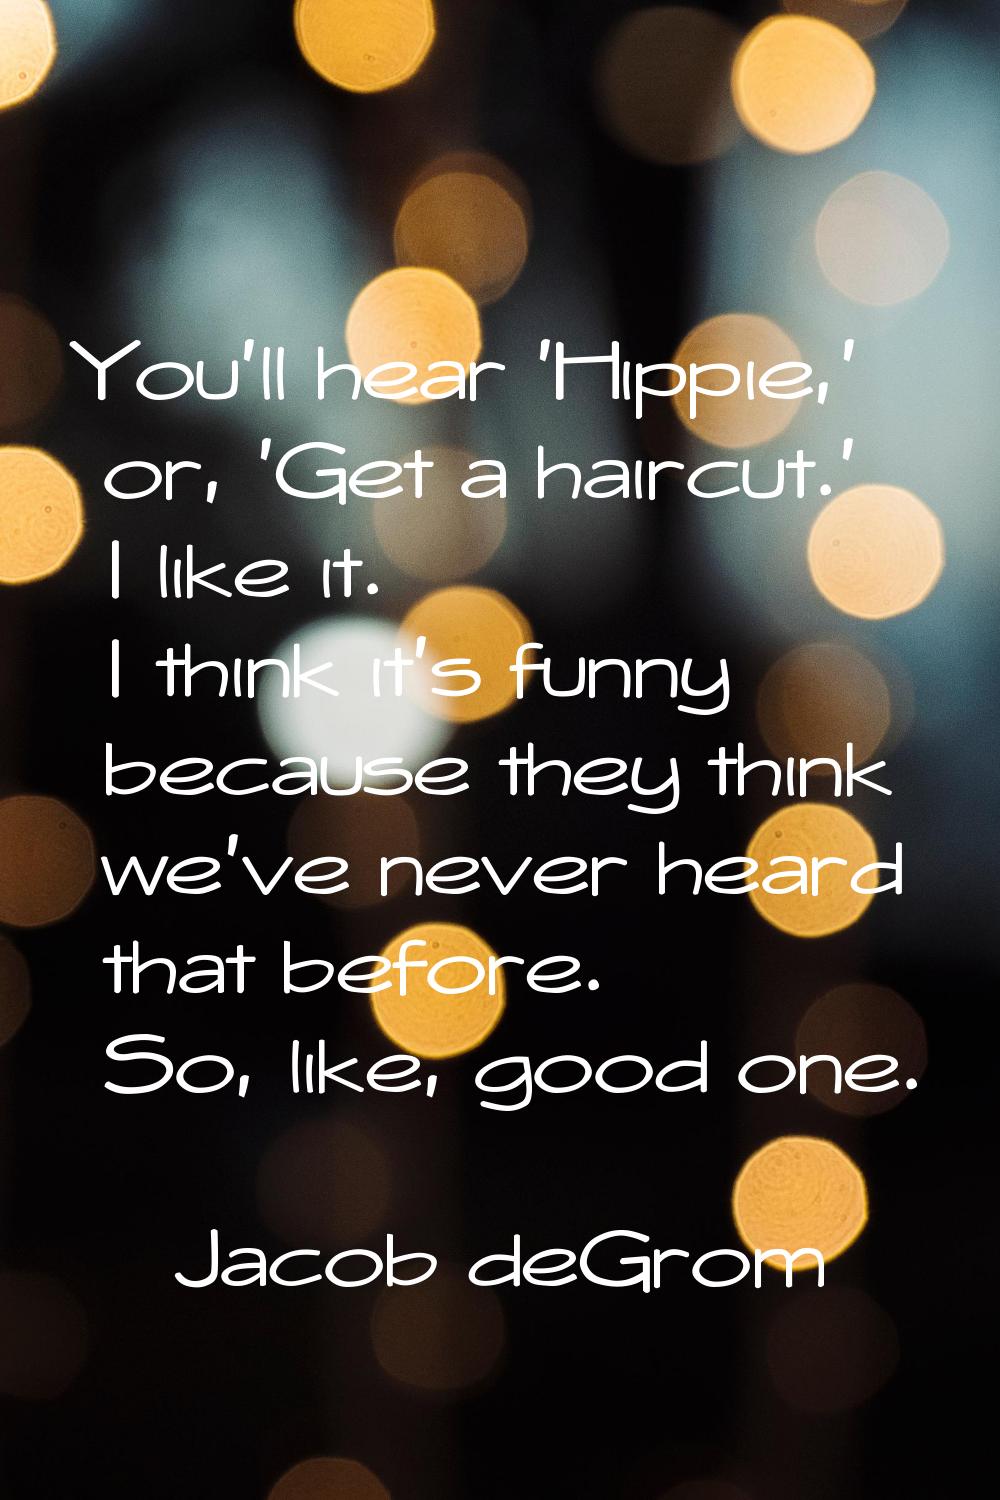 You'll hear 'Hippie,' or, 'Get a haircut.' I like it. I think it's funny because they think we've n